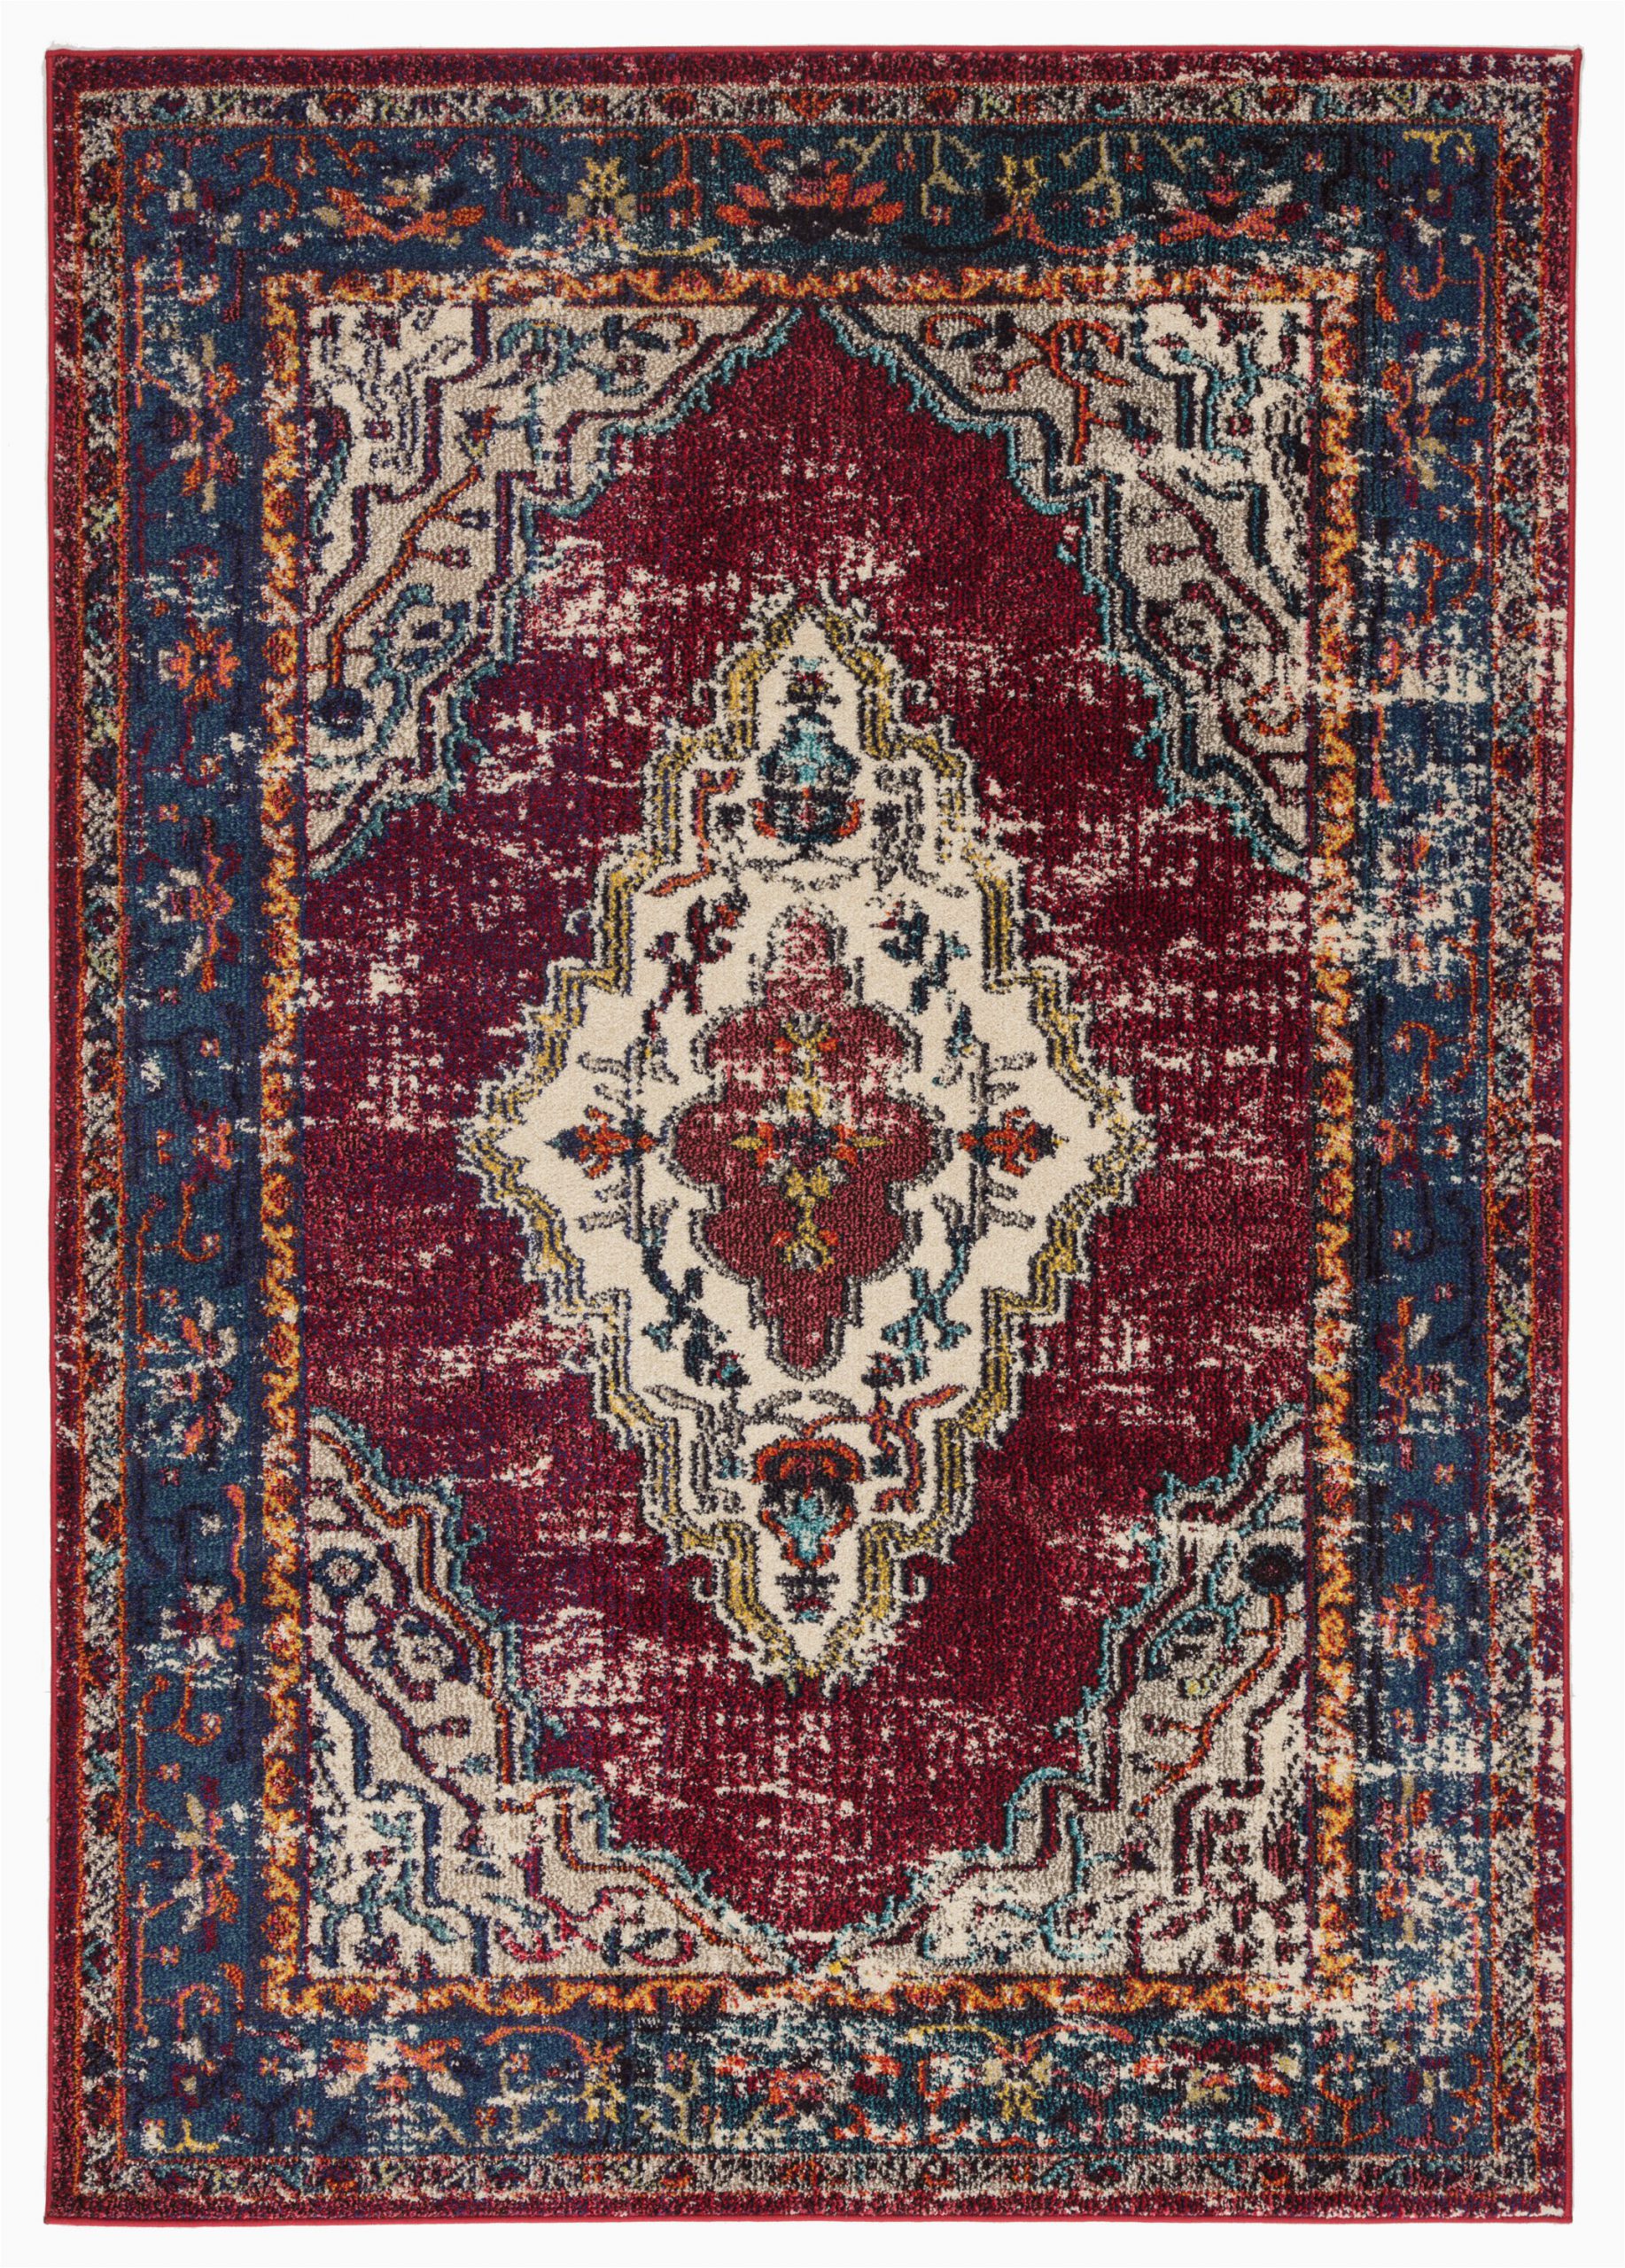 Radiant Floor Heating and area Rugs Avianna Persian Inspired Medallion Maroon Blue Brown area Rug